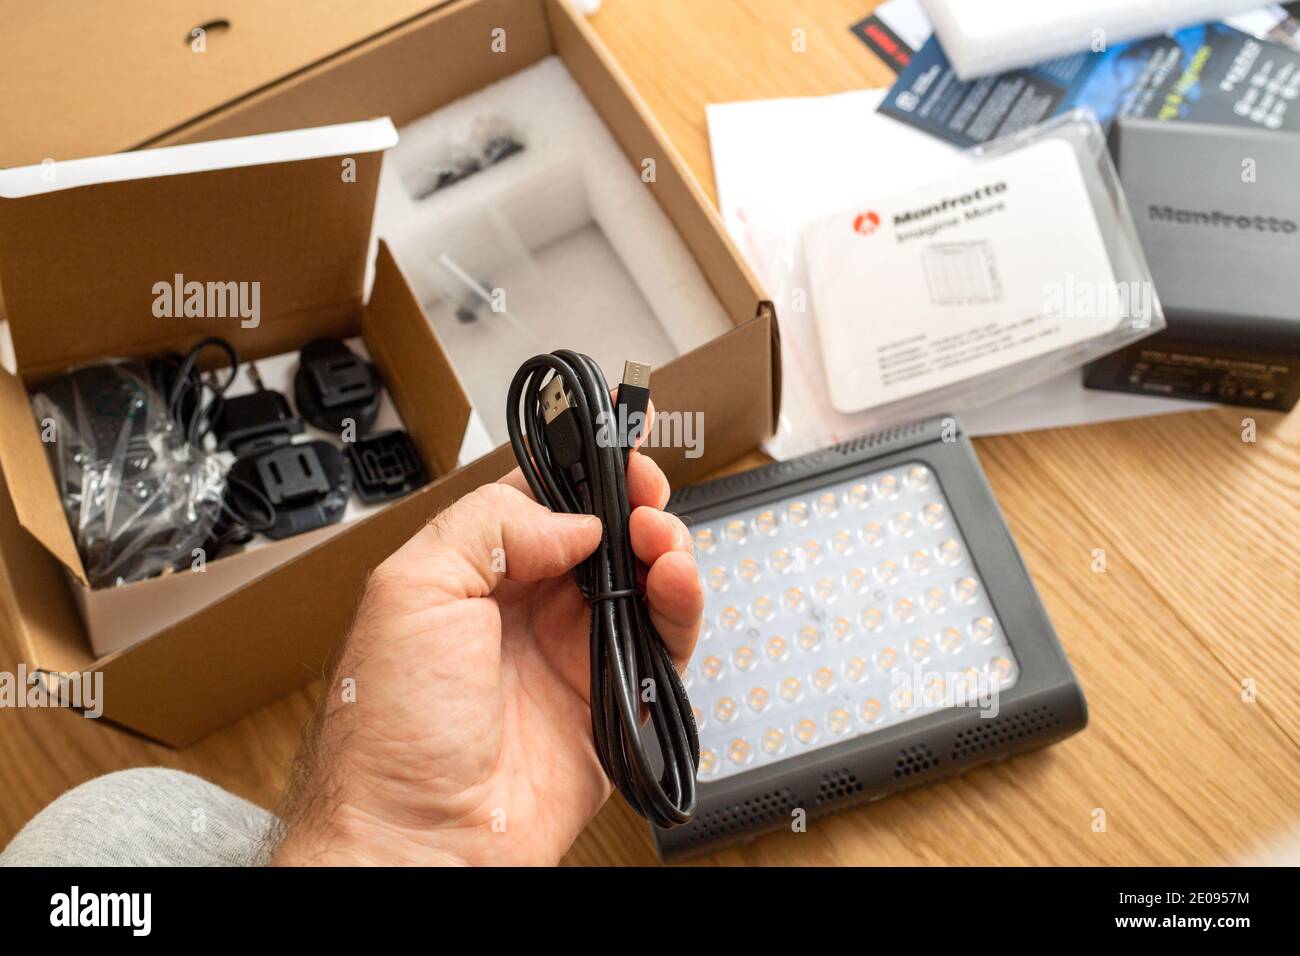 Paris, France - Dec 8 2020: POV male hand unboxing unpacking new USB cable of a Manfrotto LED Light Lykos 2.0, 2 in 1 water-resistant with Bluetooth package in background Stock Photo